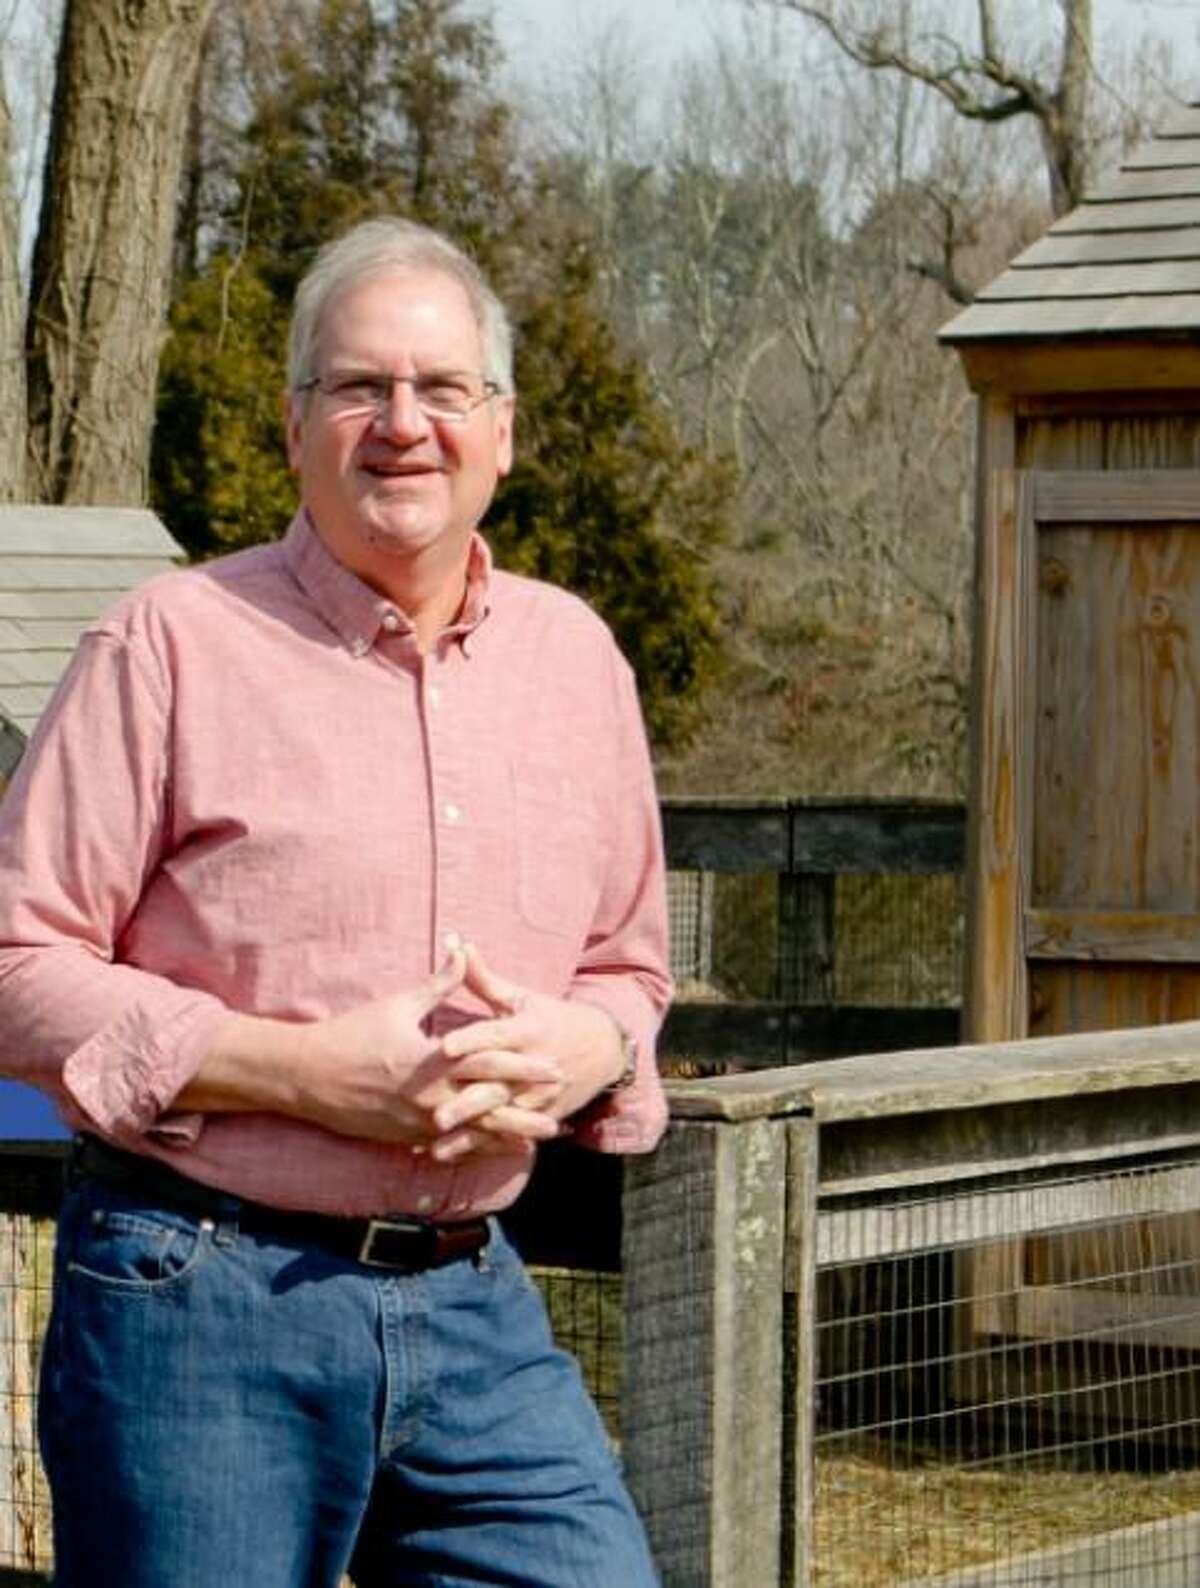 Wilton's Keith Denning announced earlier this year that he is seeking election to represent the 42nd House District that includes Wilton and parts of New Canaan and Ridgefield.